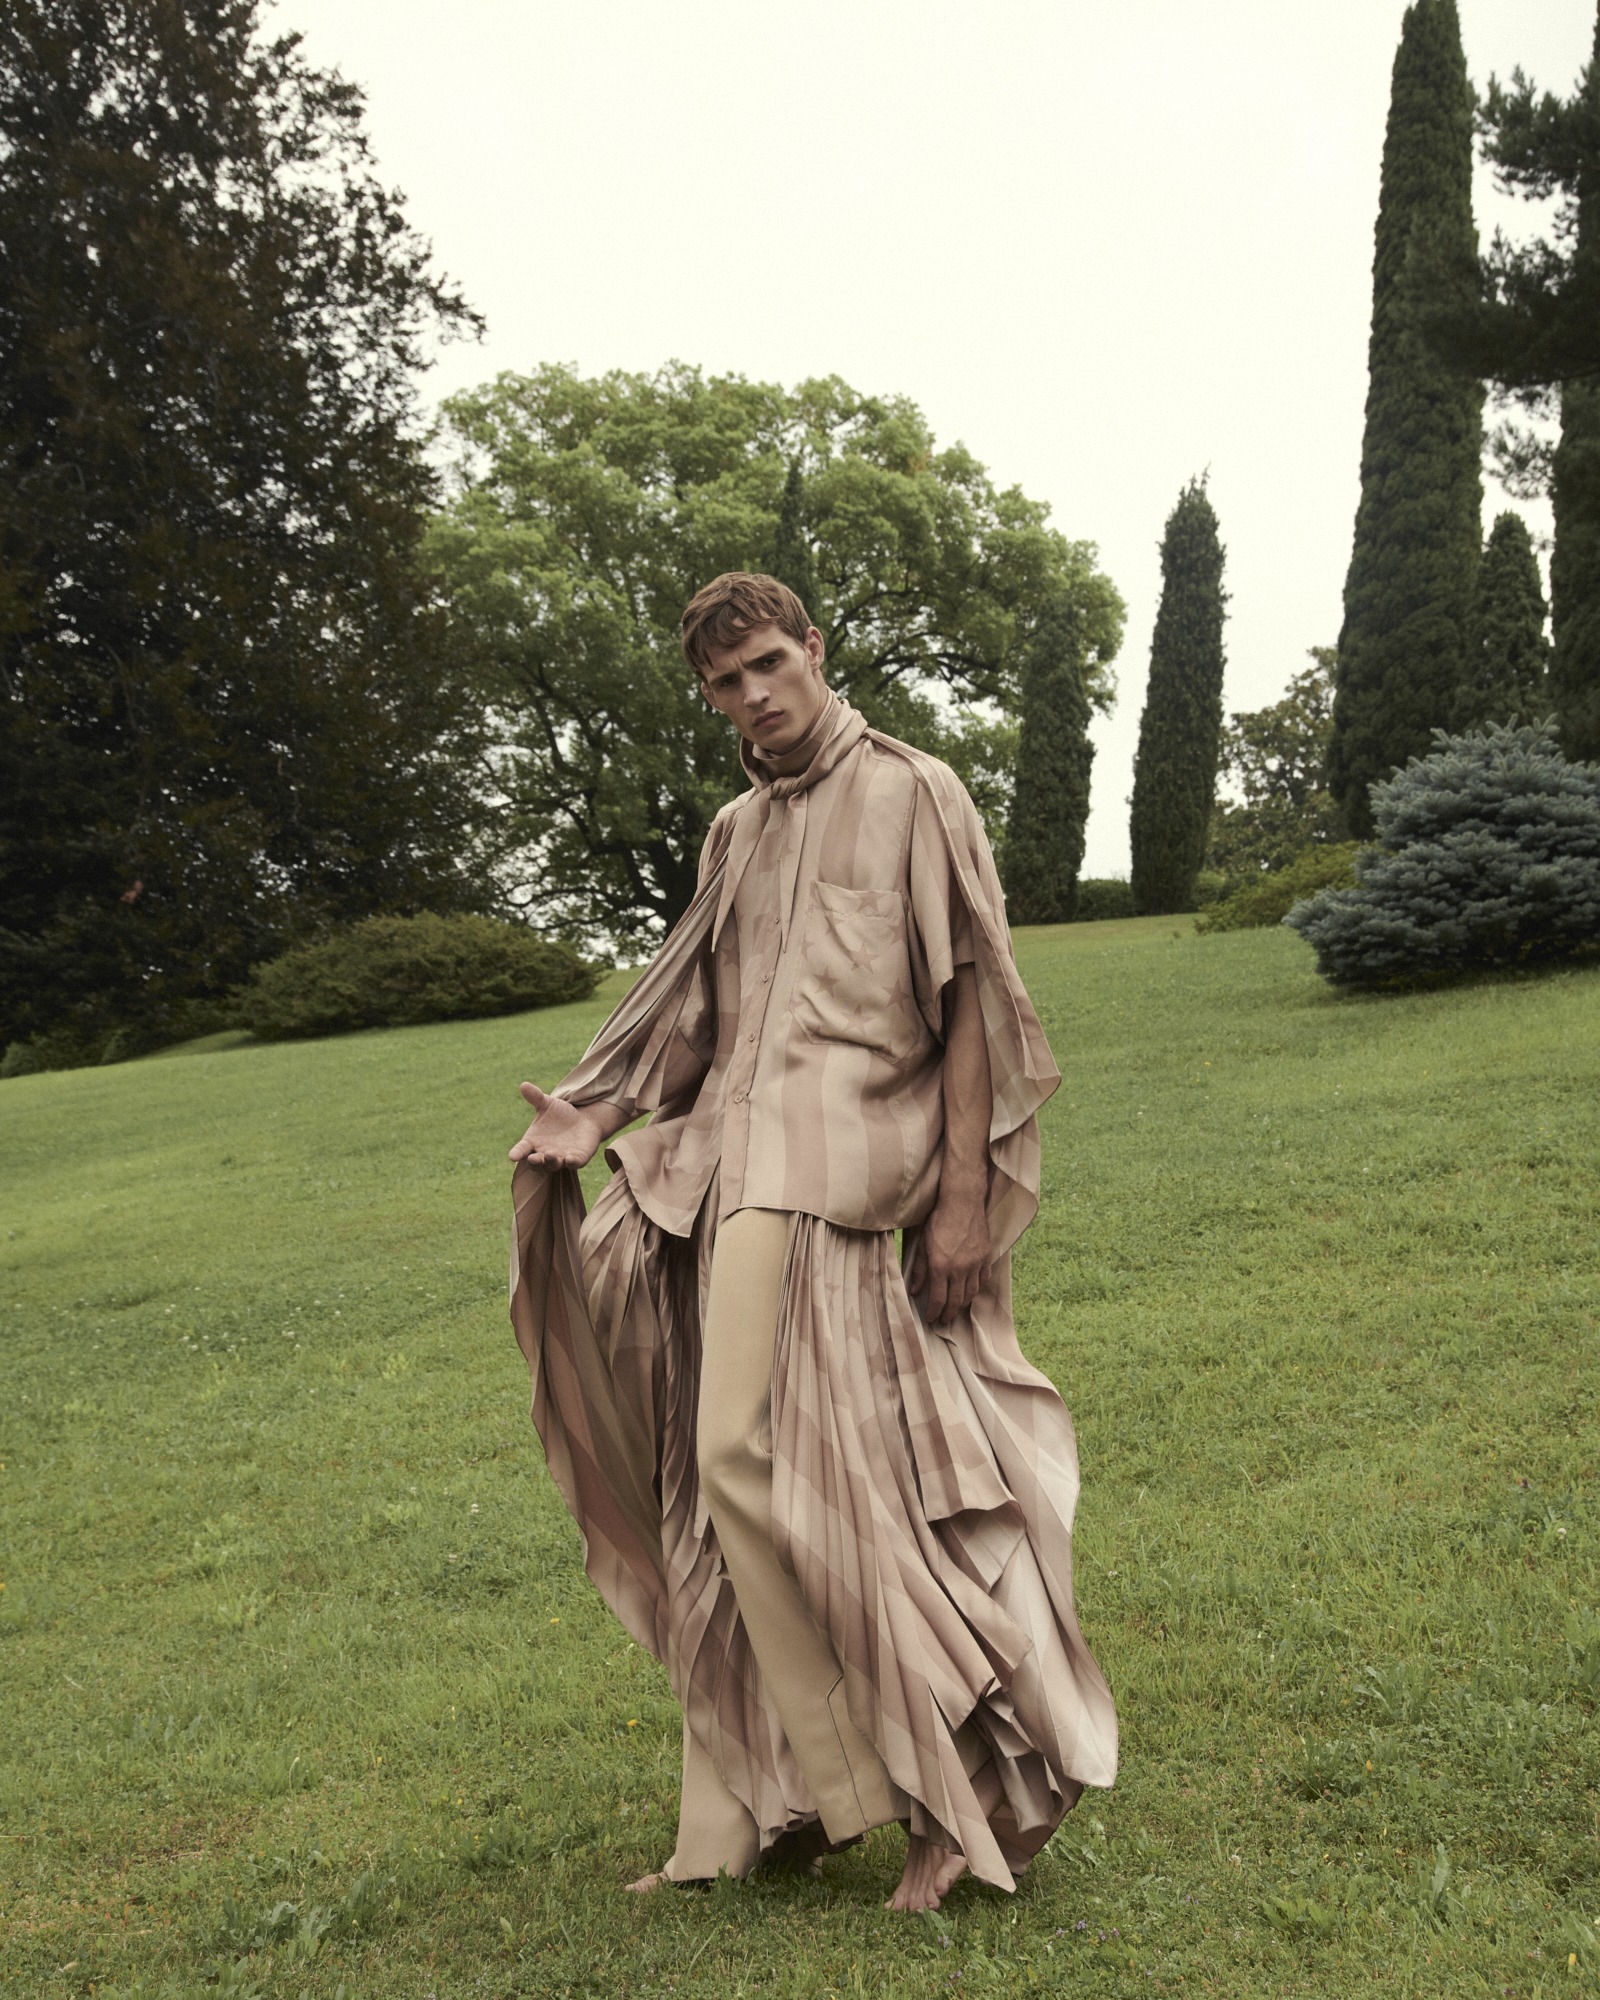 Essential Homme Magazine 7 by Andreas ORTNER